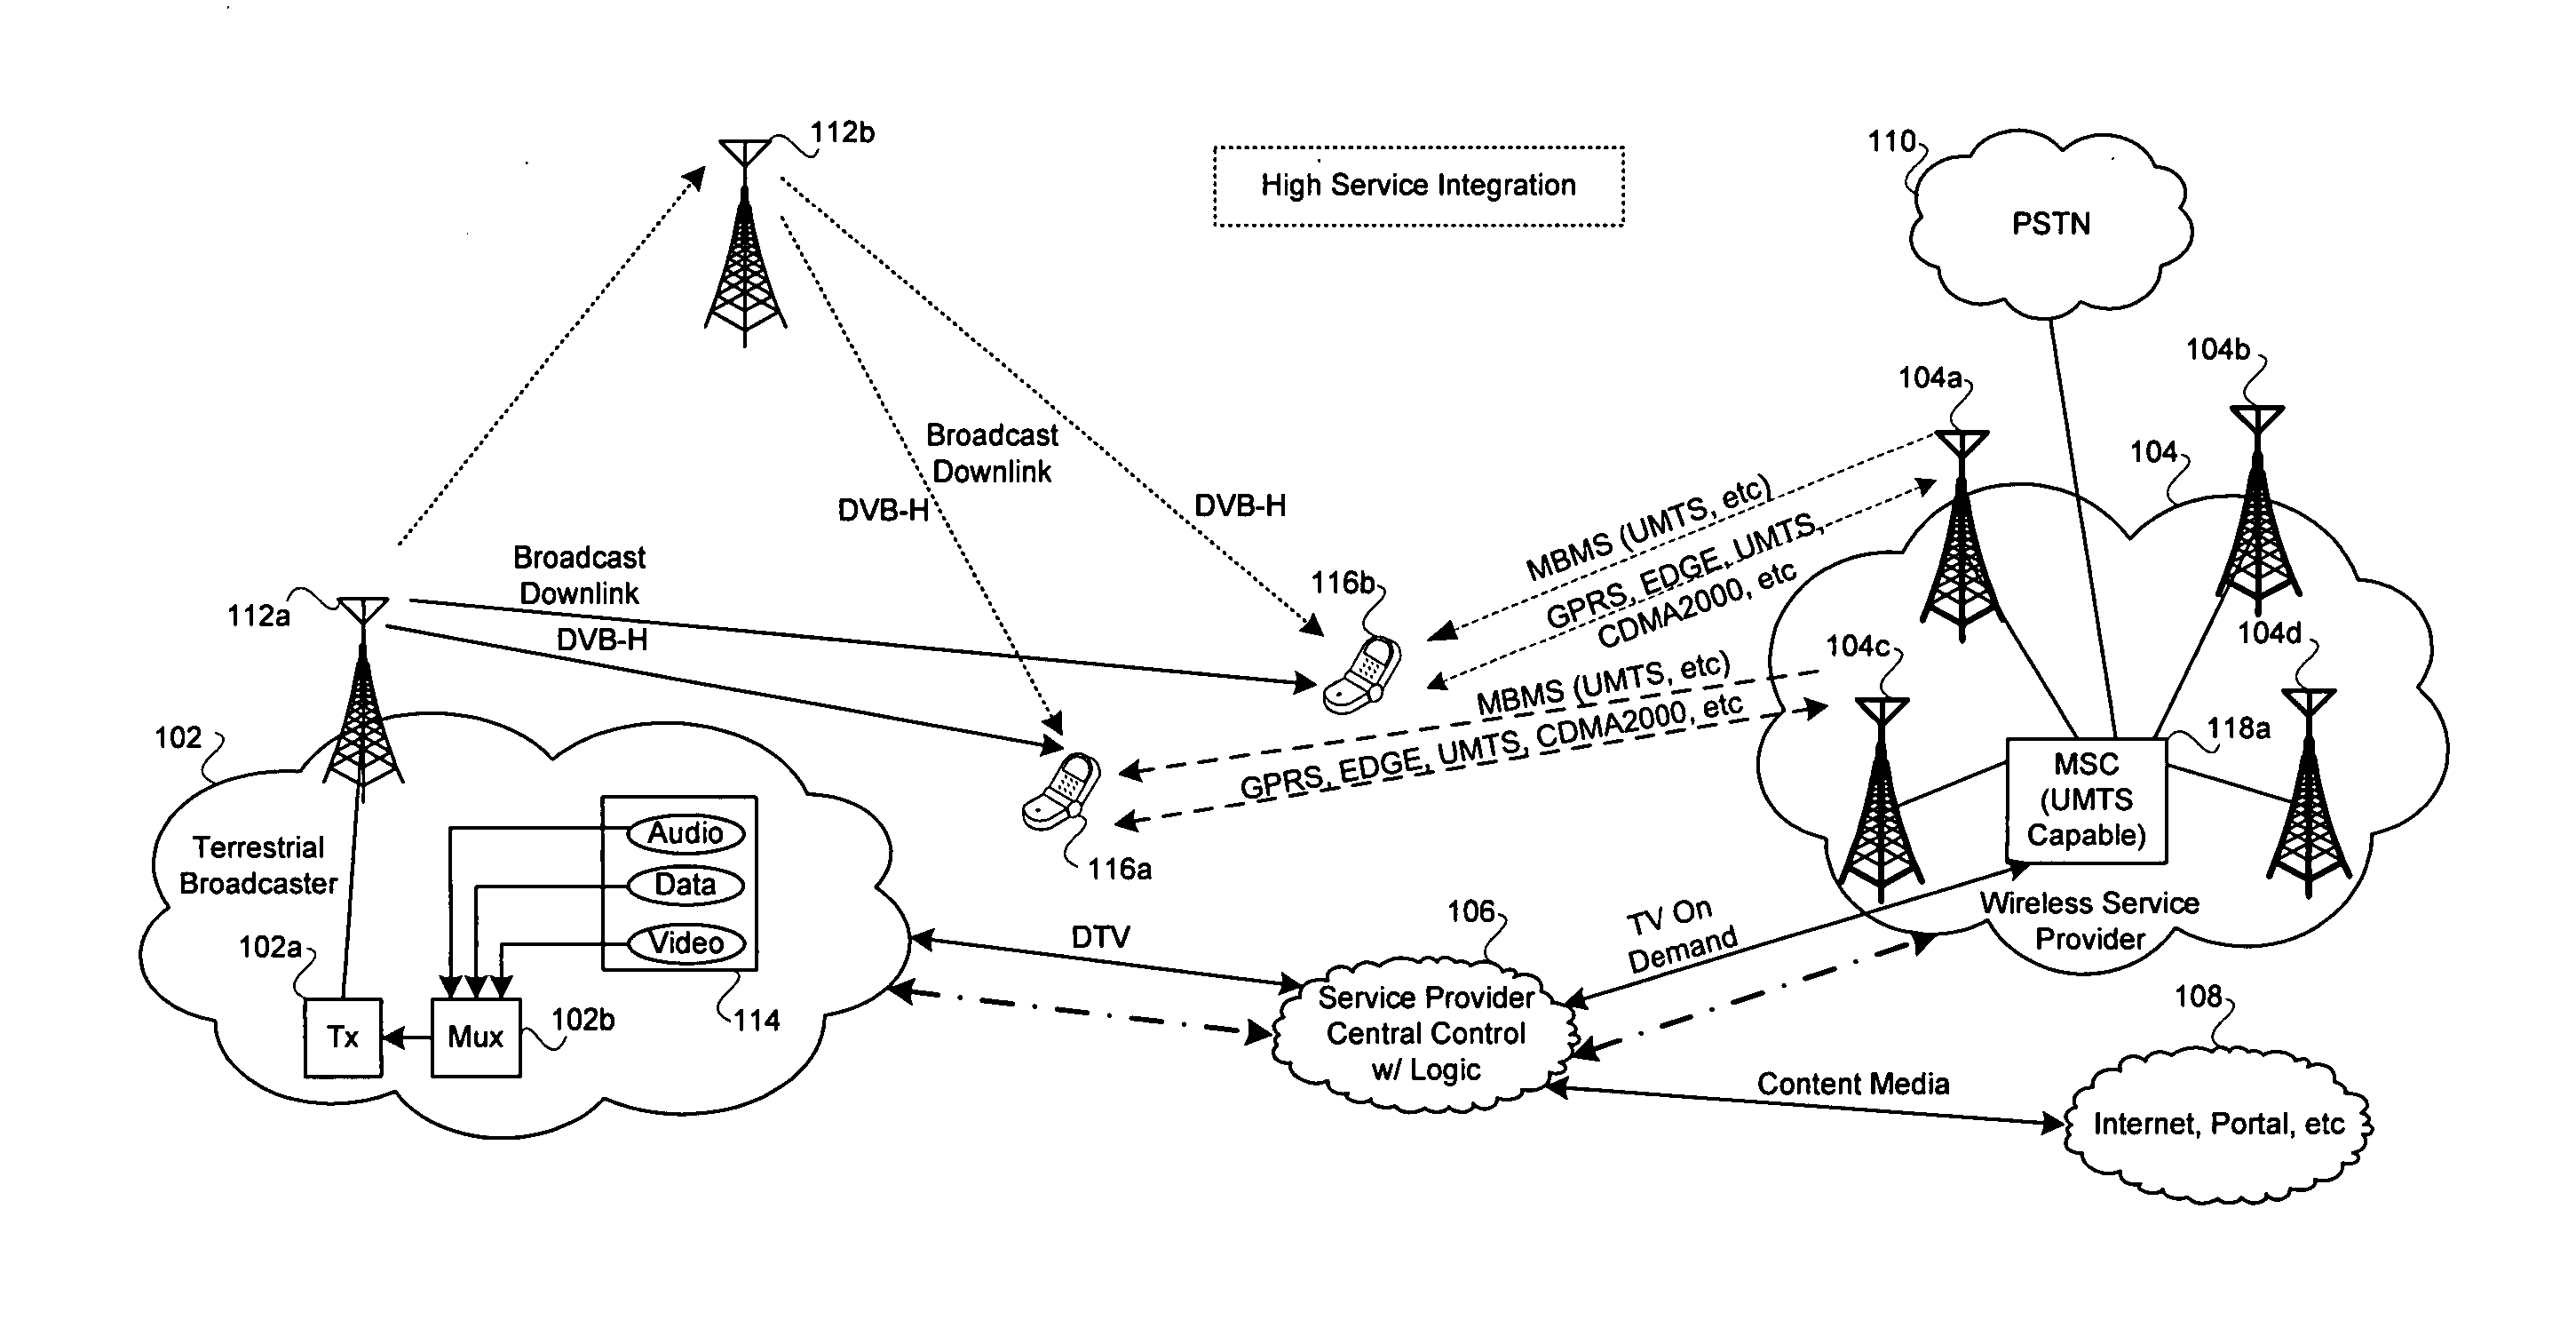 Method and system for mobile receiver antenna architecture for European cellular and broadcasting services